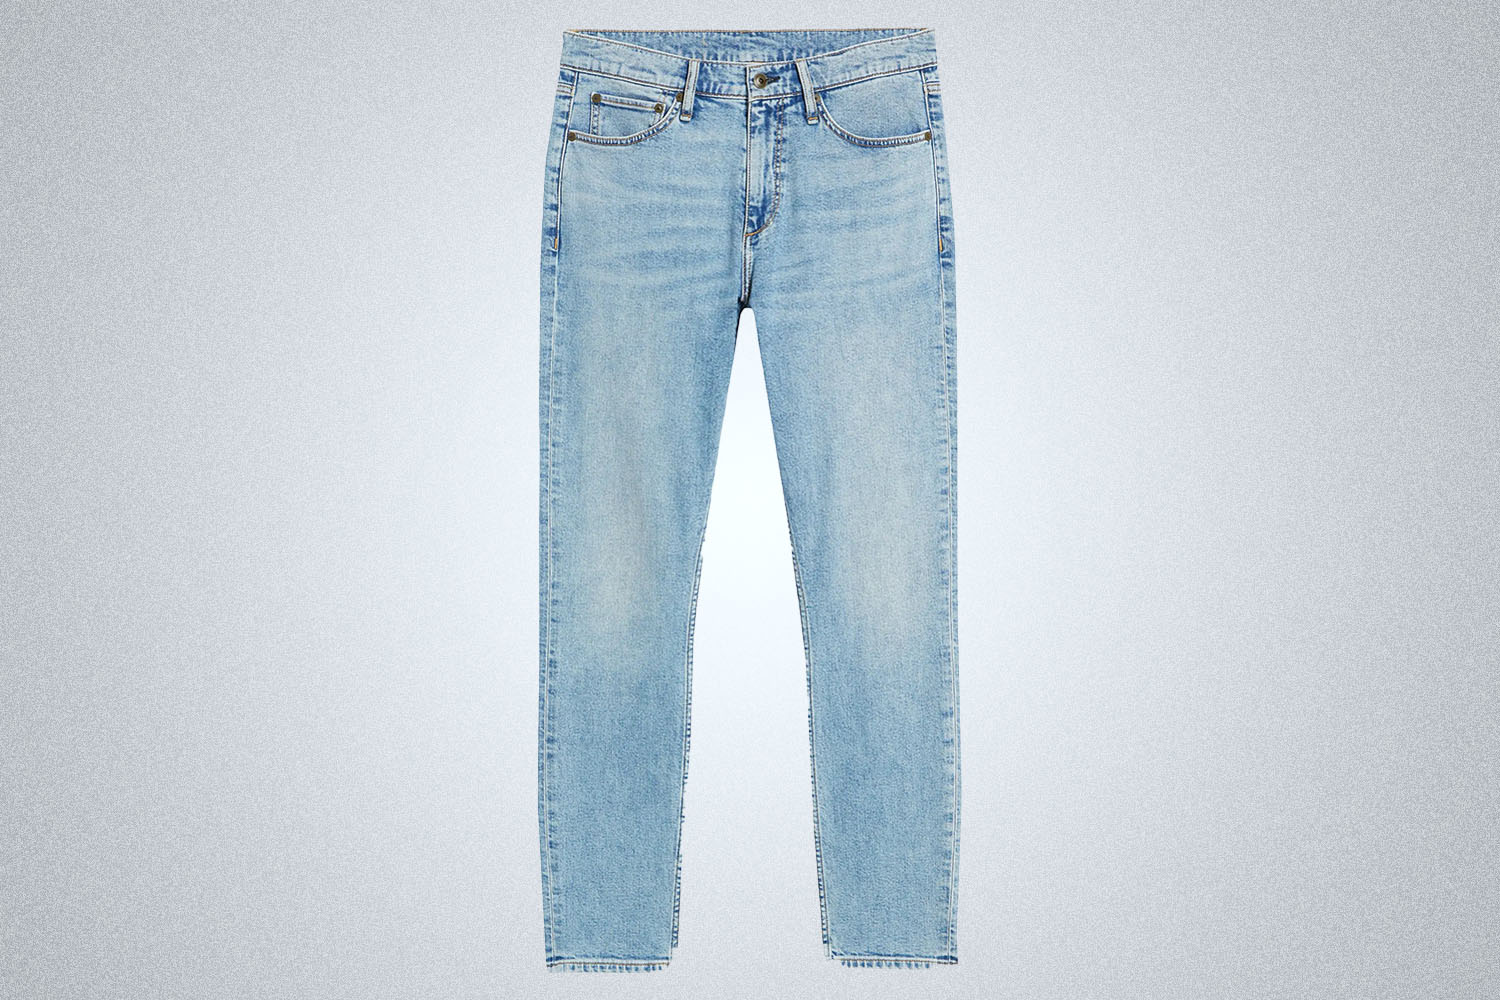 a pair of straight legged, light-wash denim from Rag and Bone on a grey background